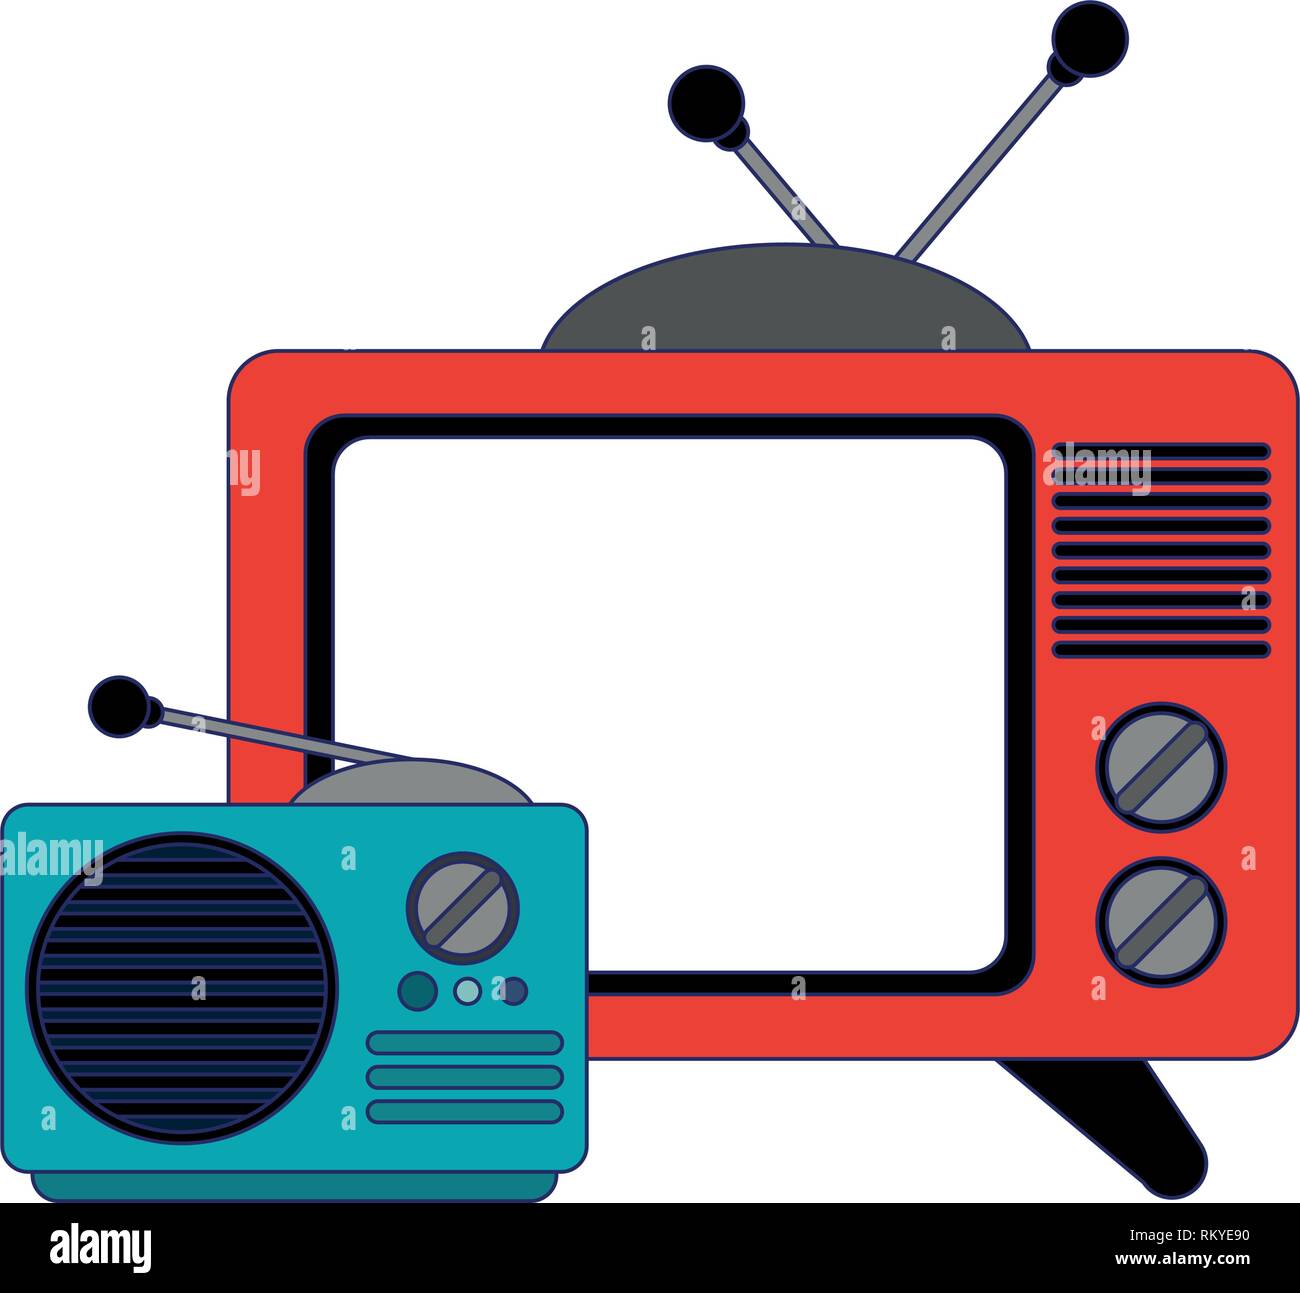 Radio and television show Stock Vector Images - Alamy